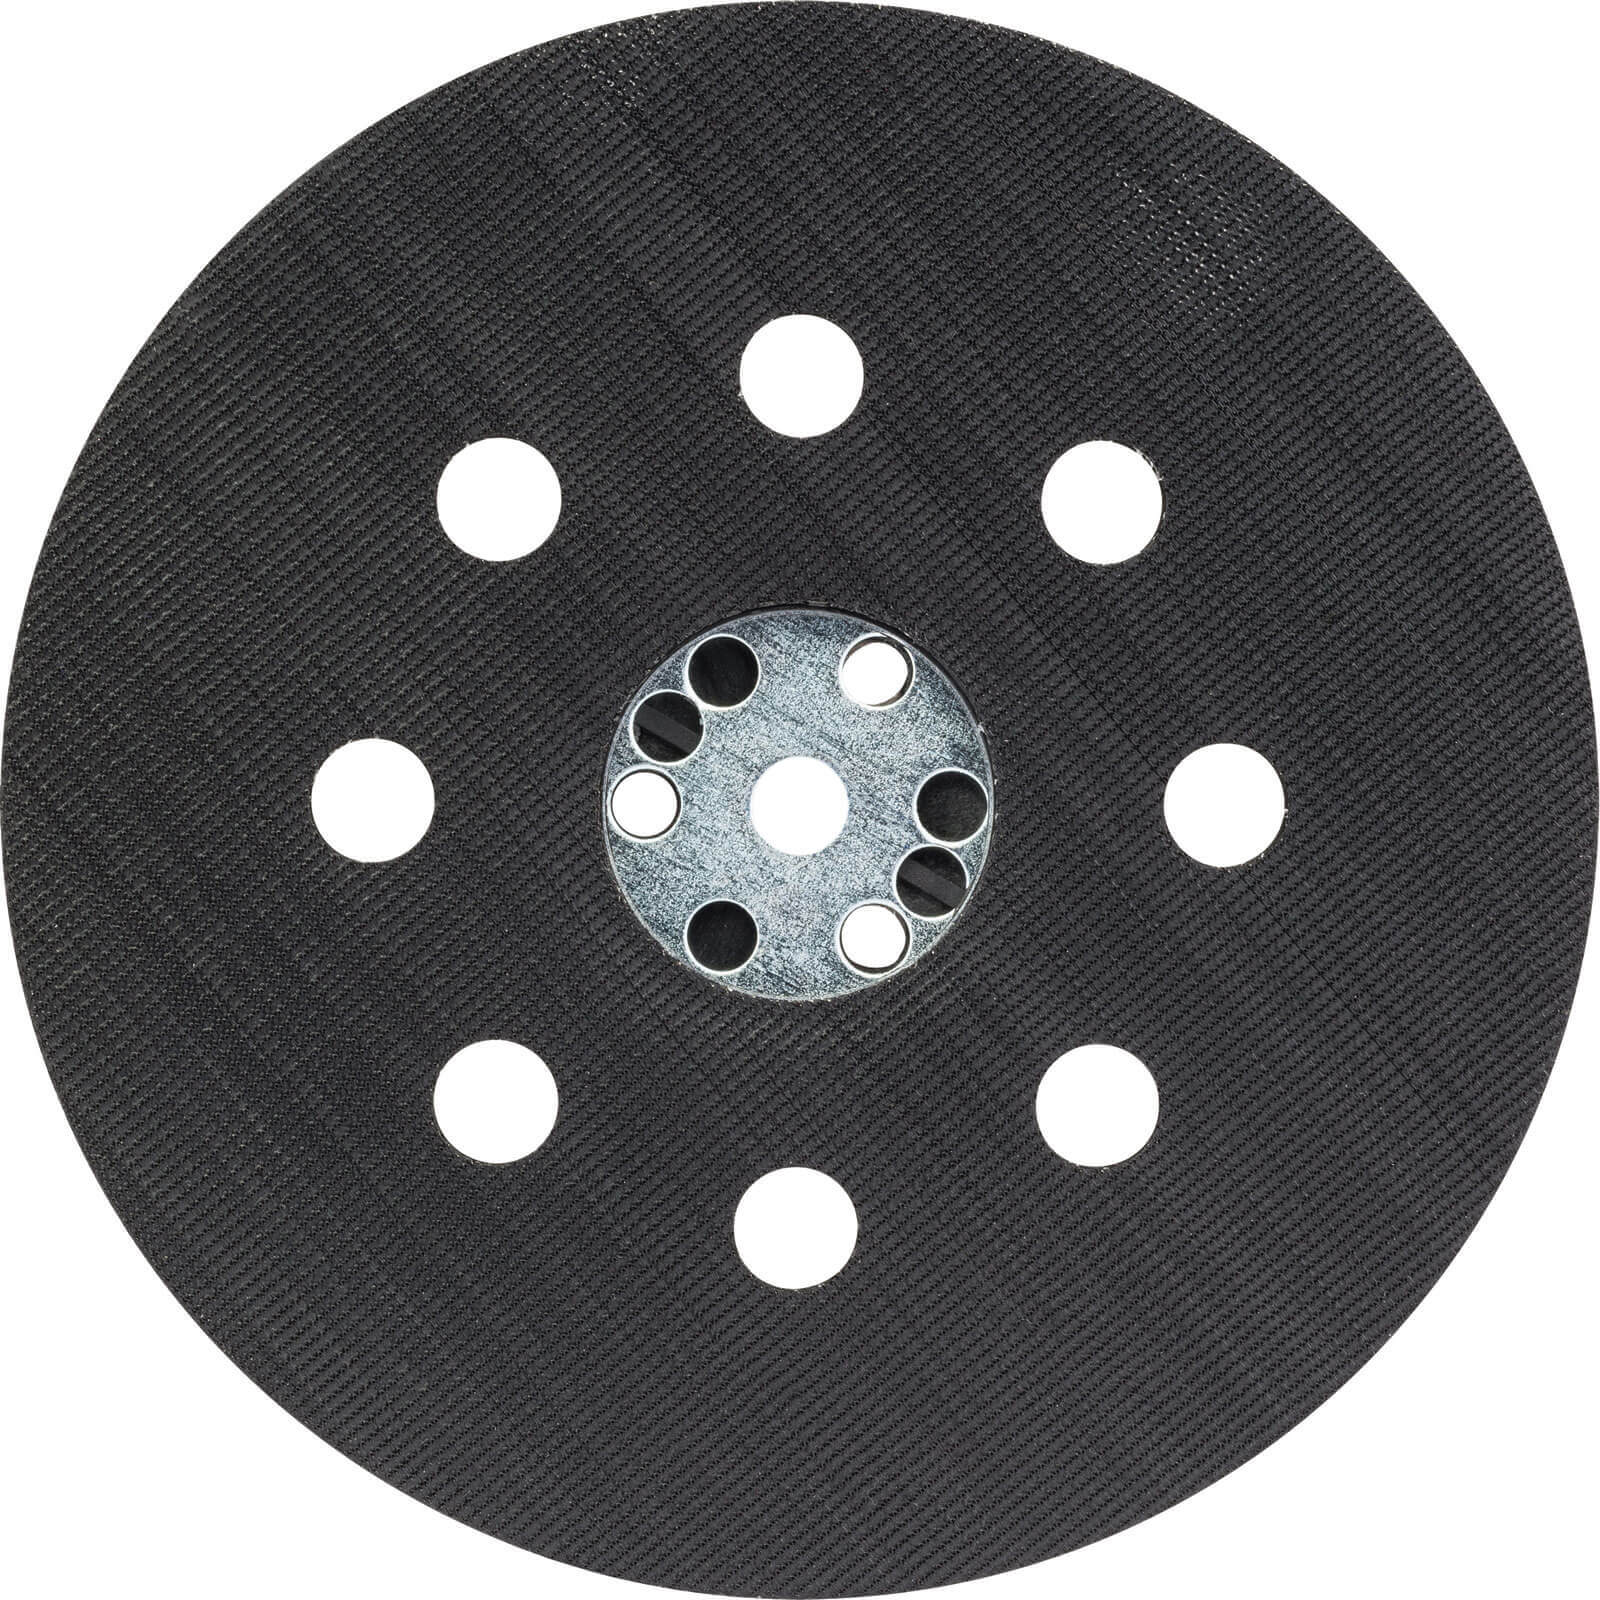 Image of Bosch Backing Pad for PEX 12/125/400 Disc Sanders 125mm